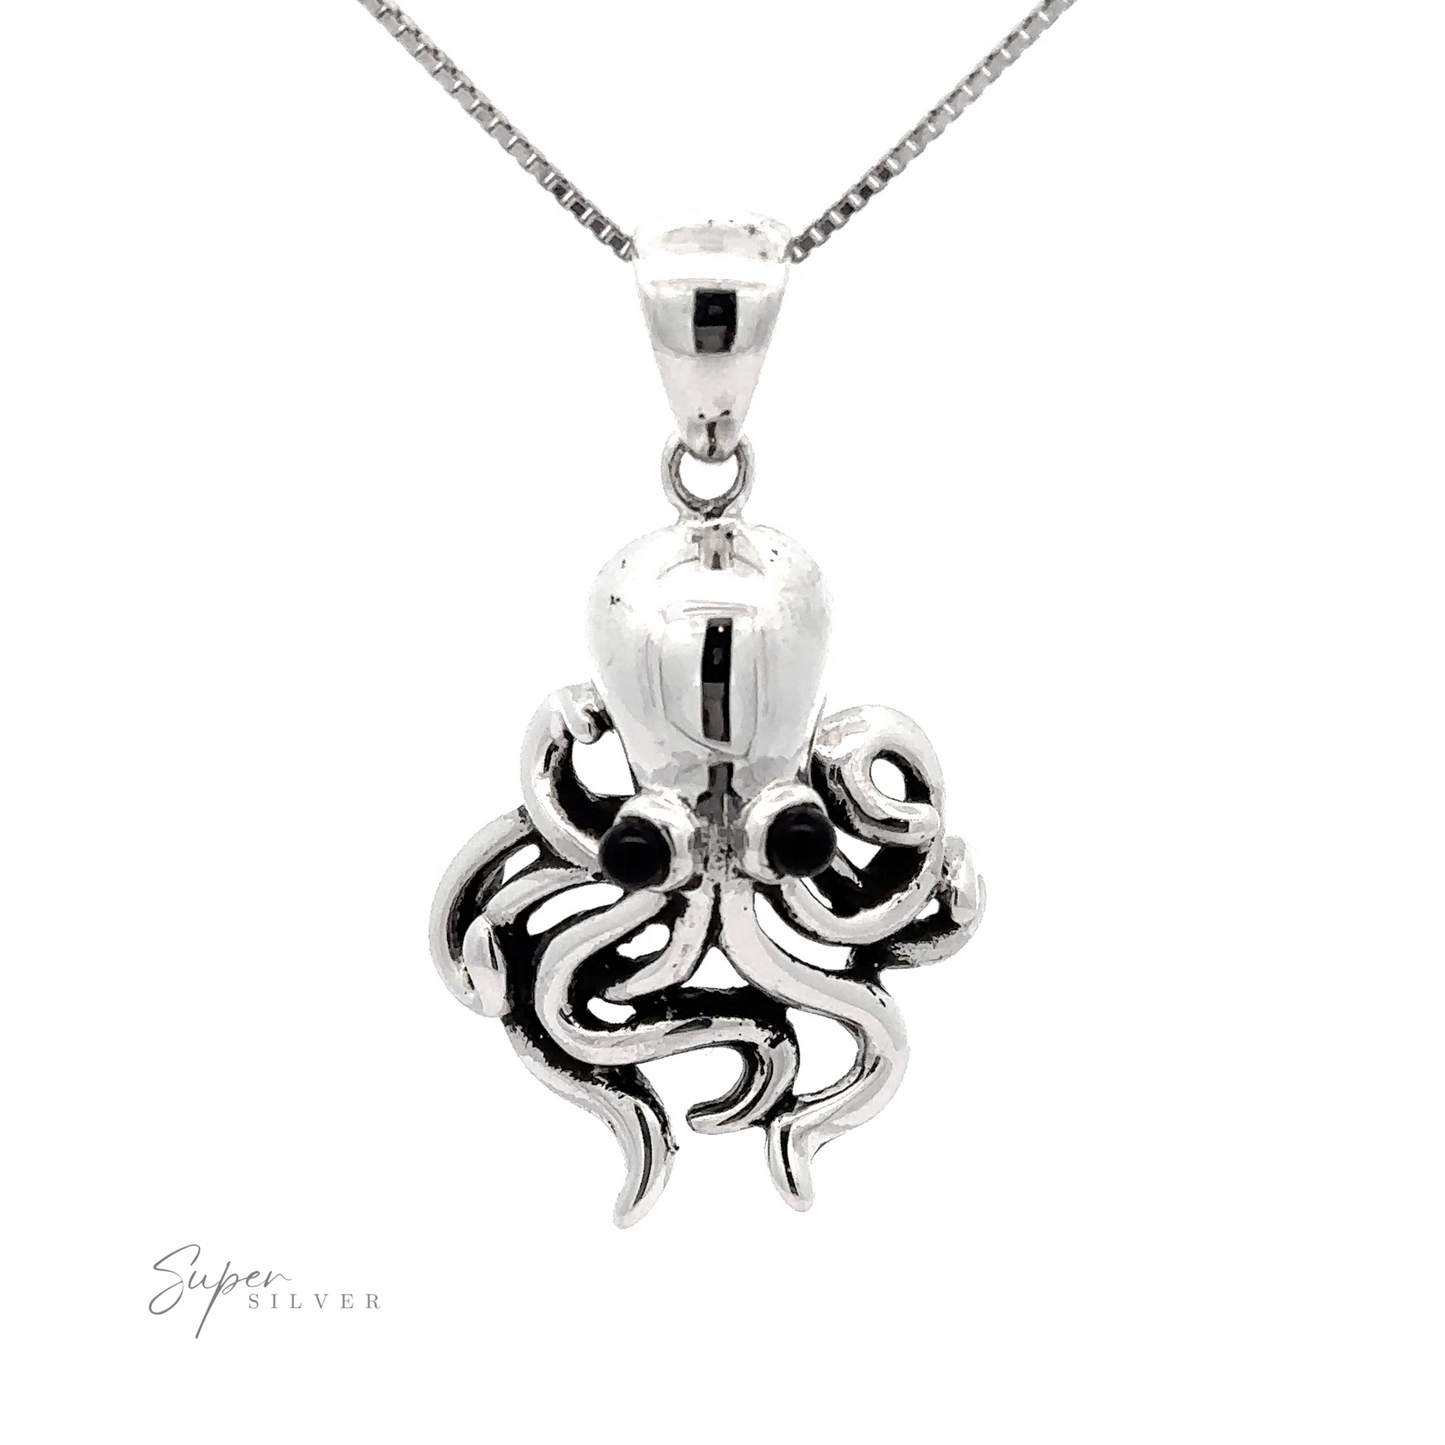 .925 Sterling Silver artisan-crafted Octopus Pendant on a chain.
Product Name: Octopus Pendant